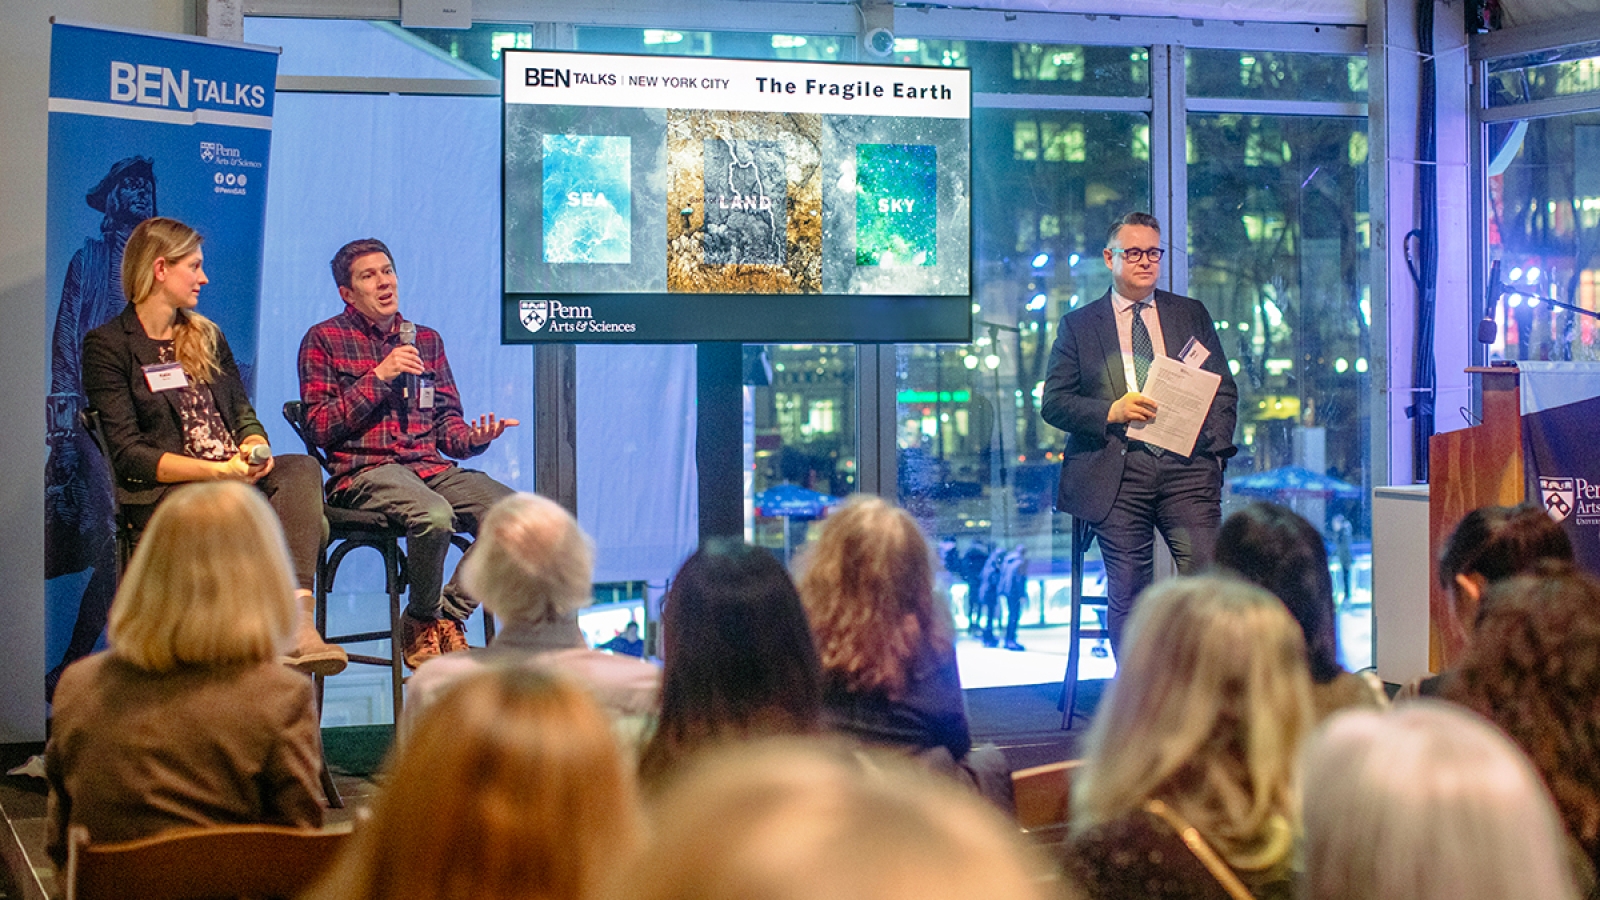 Katie Barott, Douglas Jerolmack, and Mark Trodden seated on a stage with a crowd in front of them. In the center of the stage is a television with the text "BEN TALKS NEW YORK CITY: The Fragile Earth" along with the words "Sea, Land, and Sky" on top of accompanying imagery. Jerolmack speaks into a hand-held microphone, and Trodden holds papers.